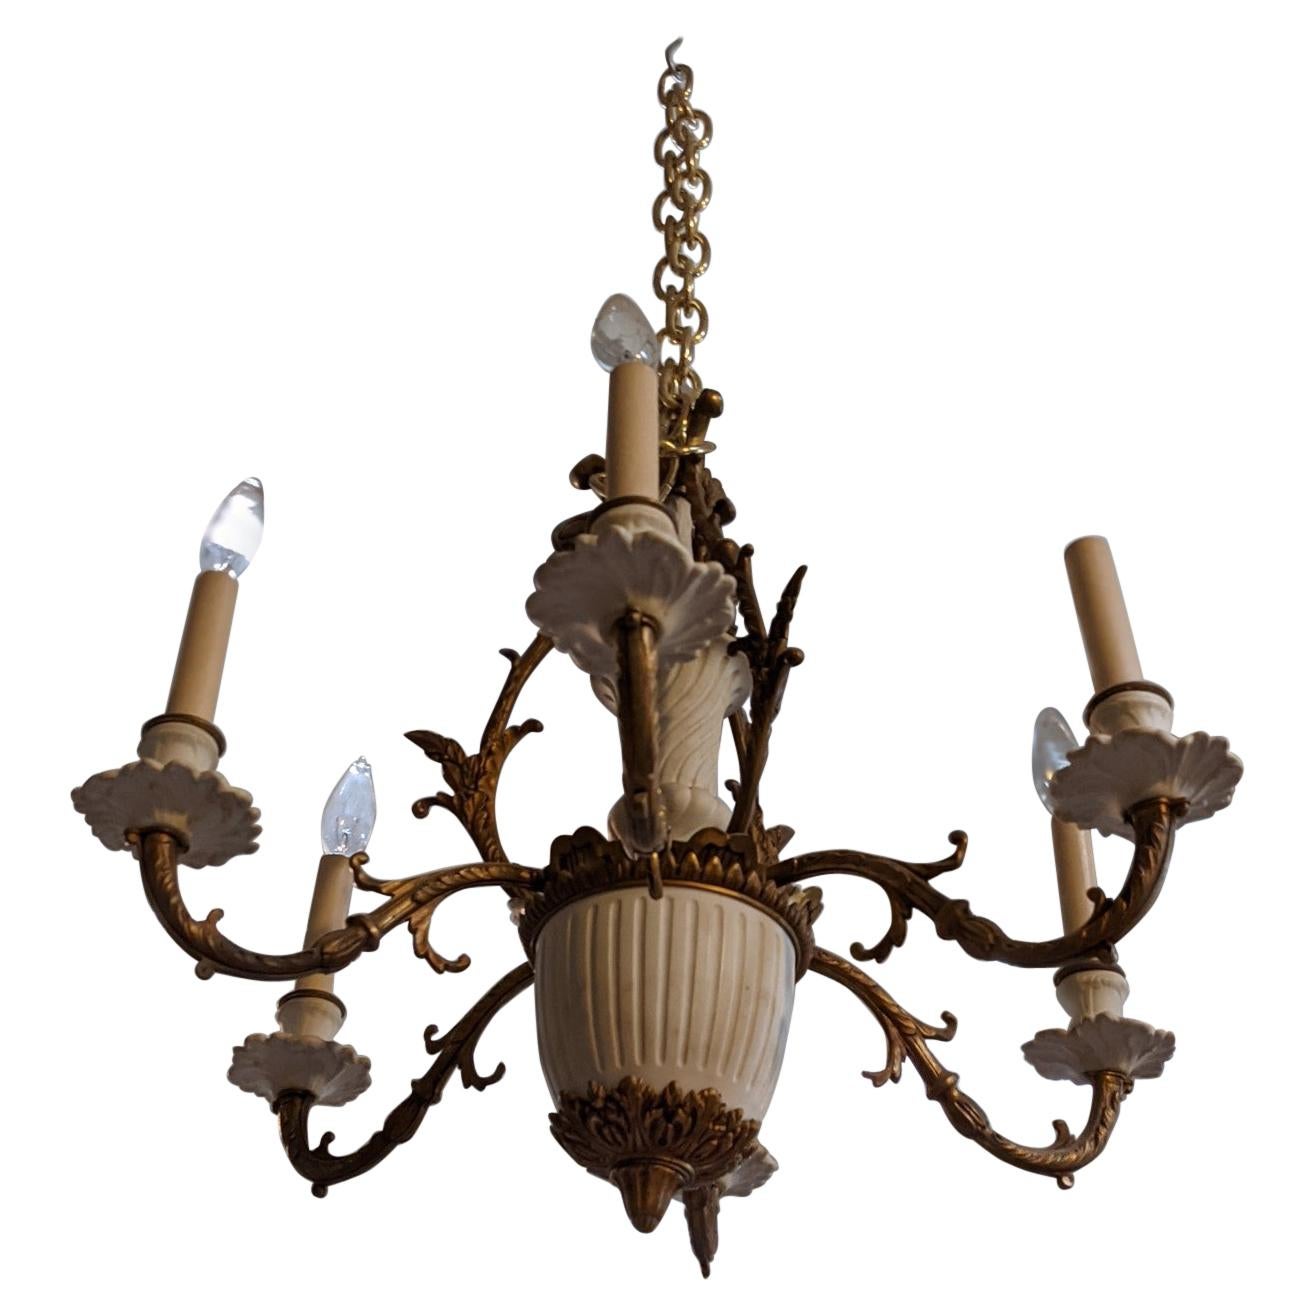 Early 20th Century Bronze & Ceramic Chandelier from England